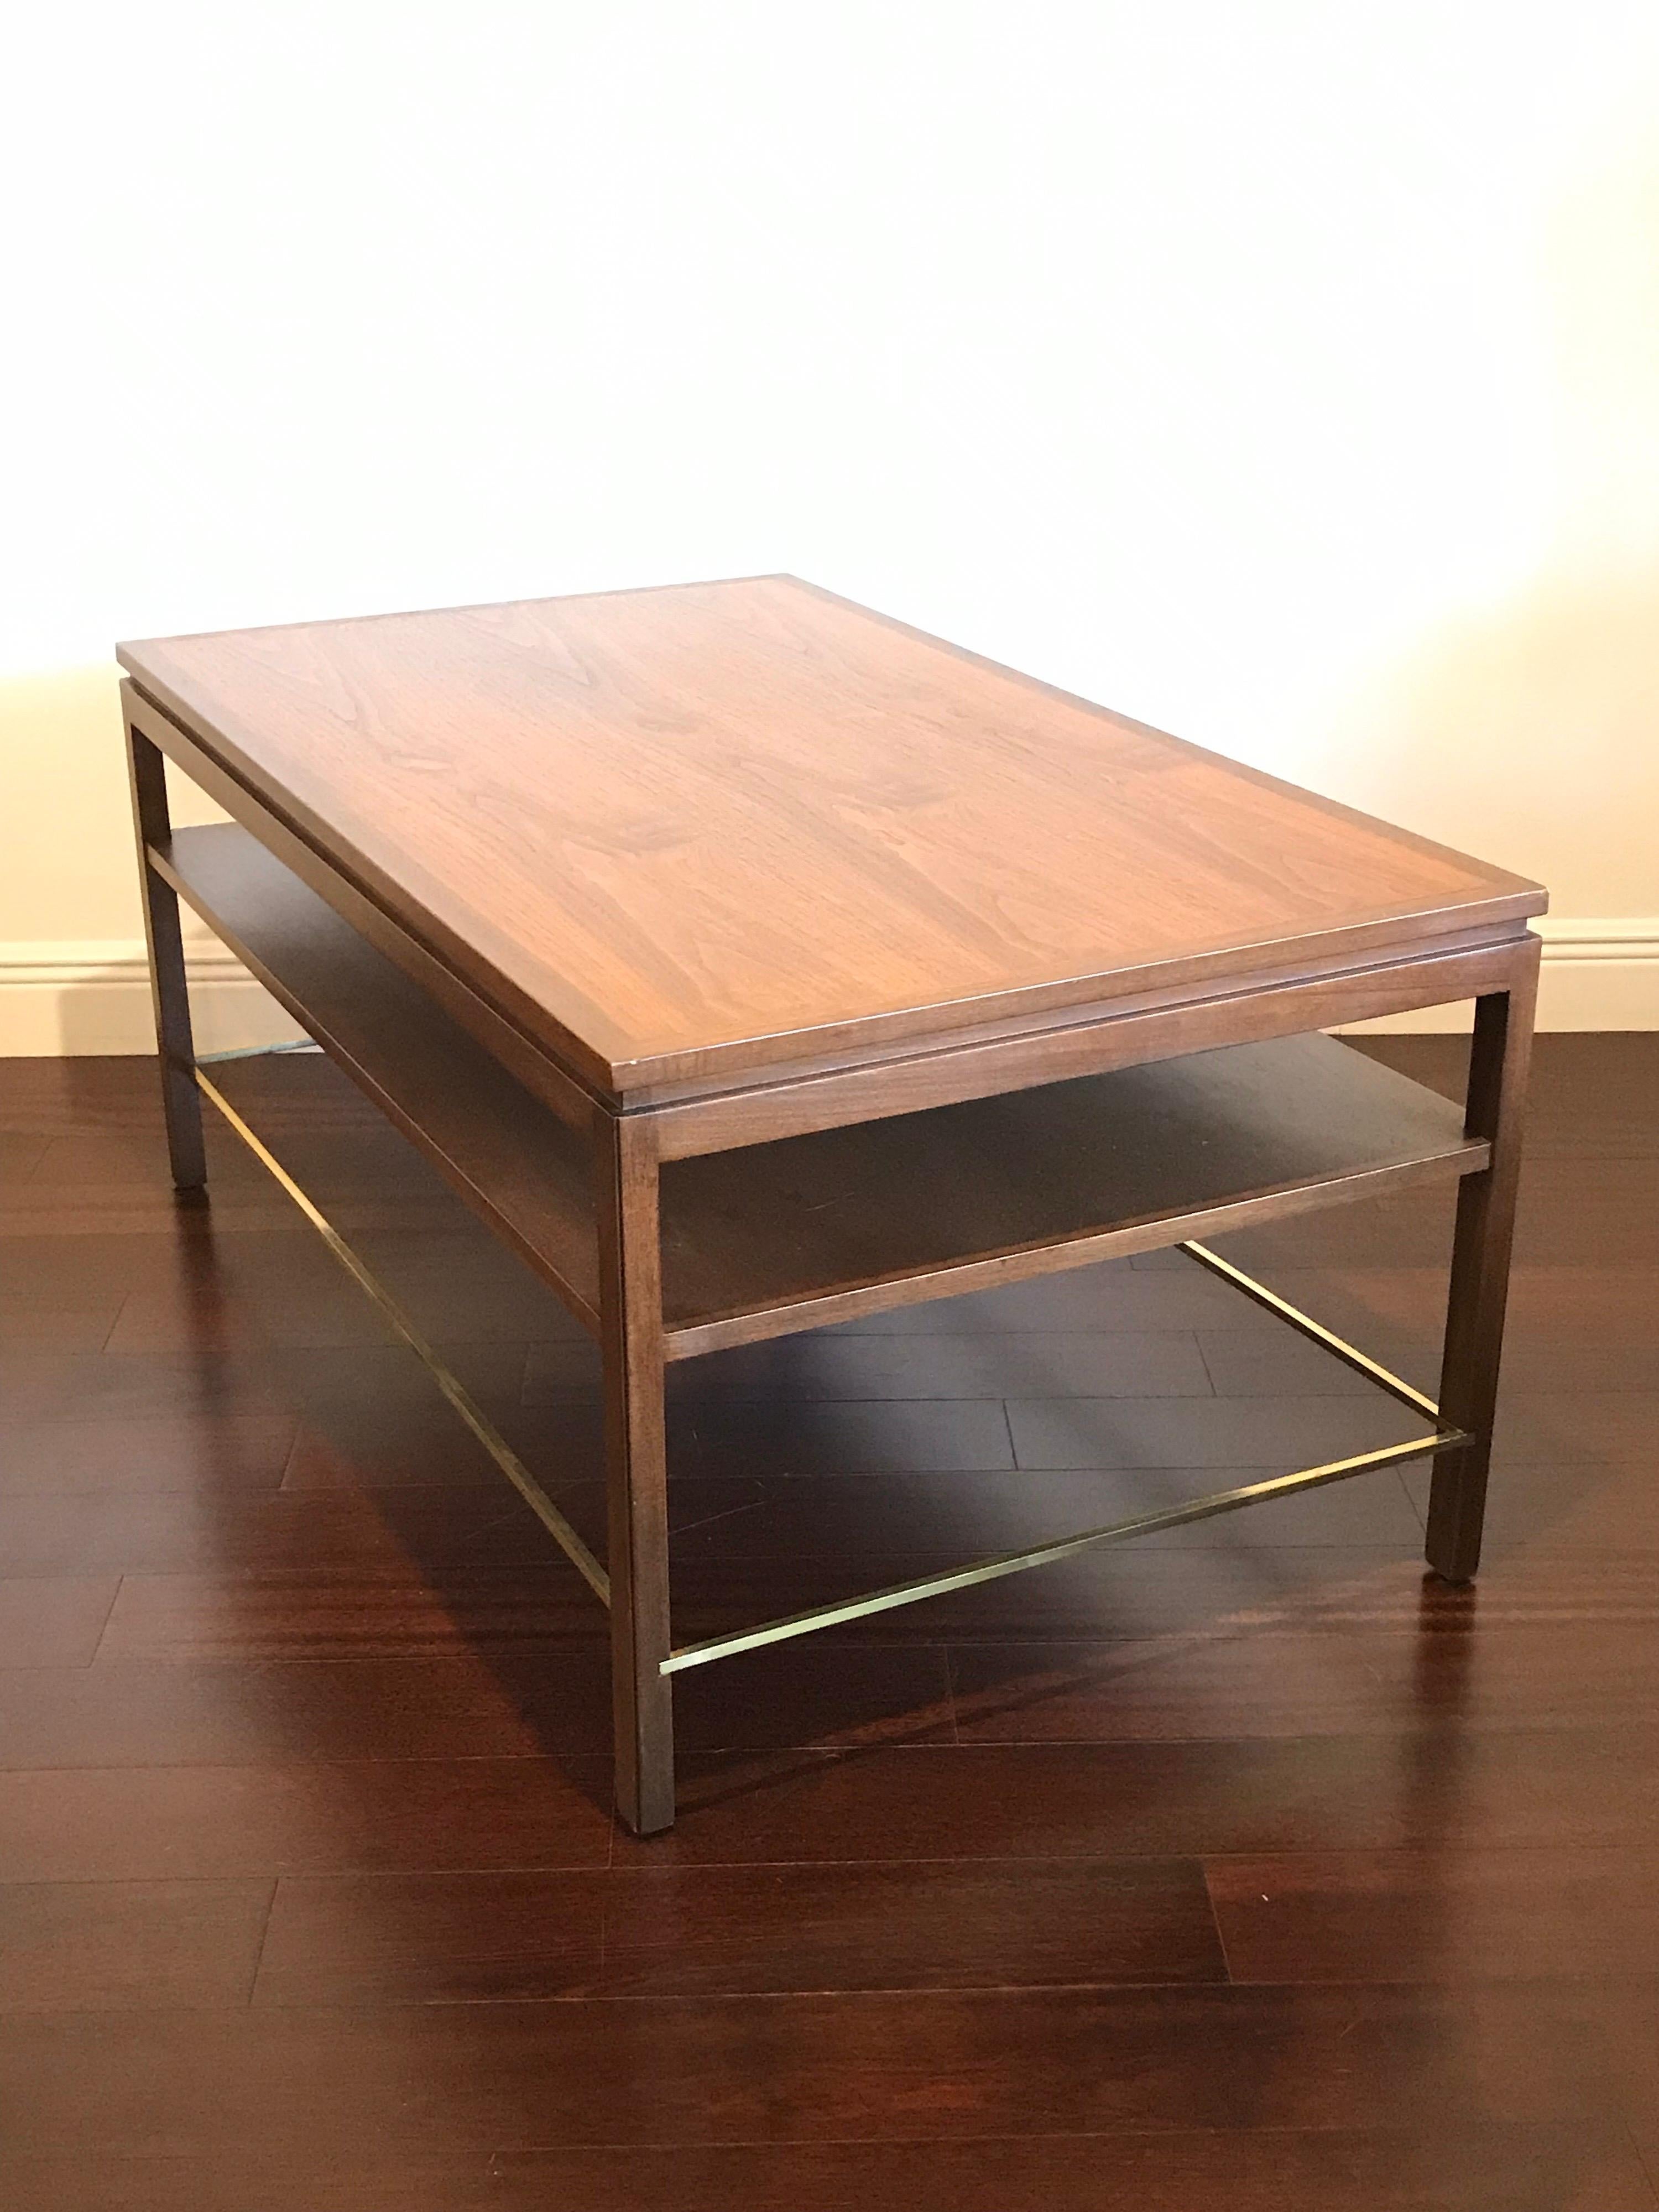 Stunning table by Edward Wormley for Dunbar. Mahogany band on top and mahogany legs, walnut top, and brass stretchers all around. Excellent vintage condition with minimal signs of wear. Truly time capsule condition.

Use as a coffee table,